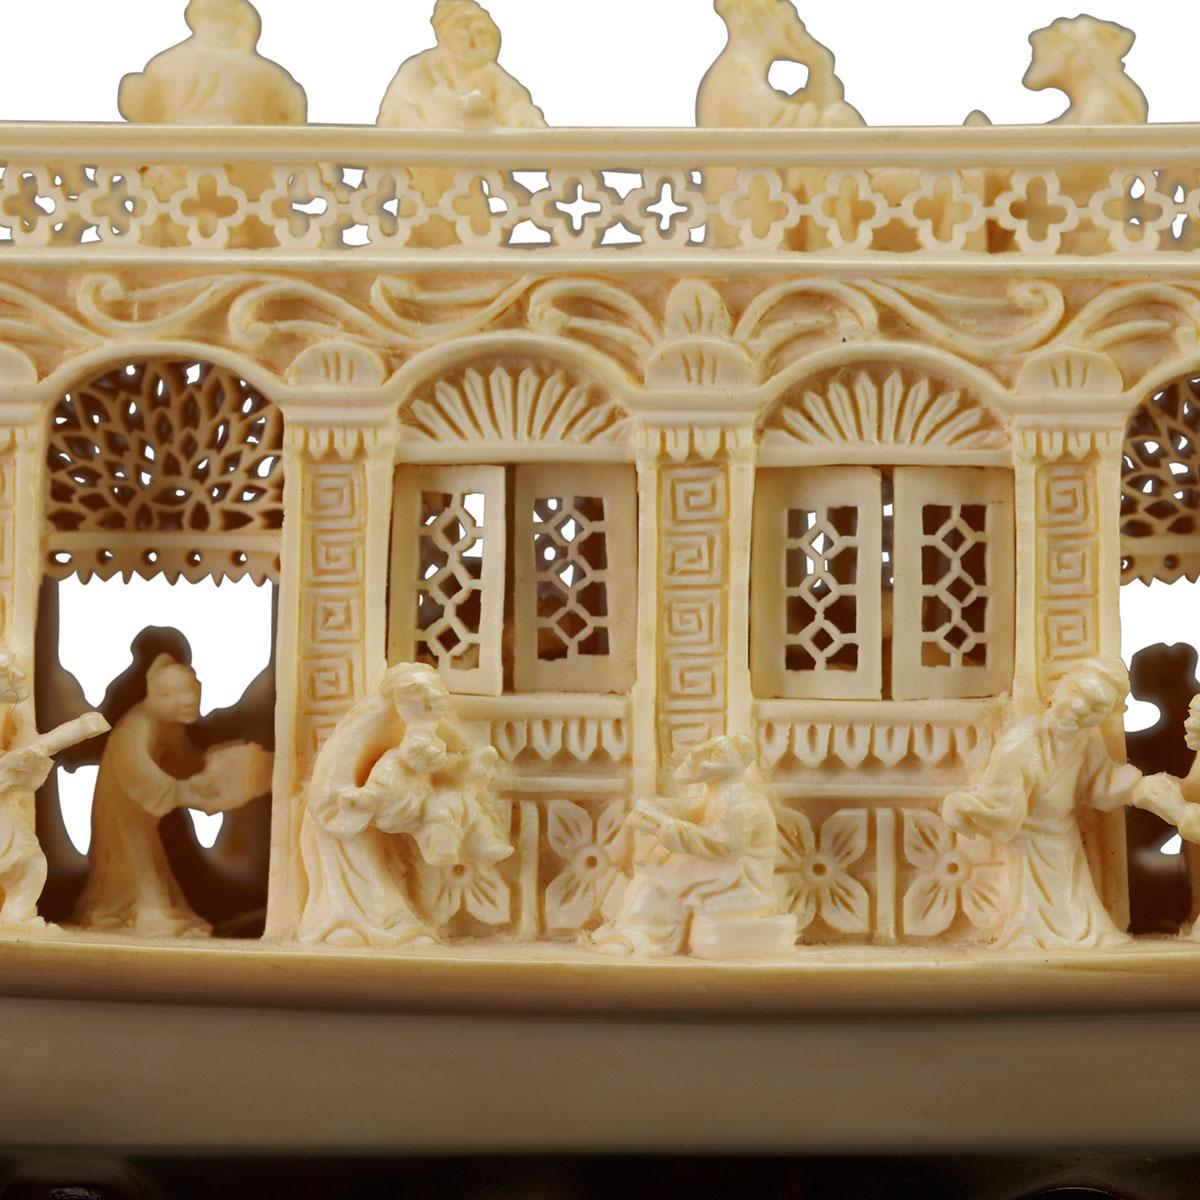 Ivory Carved ‘Party’ Boat